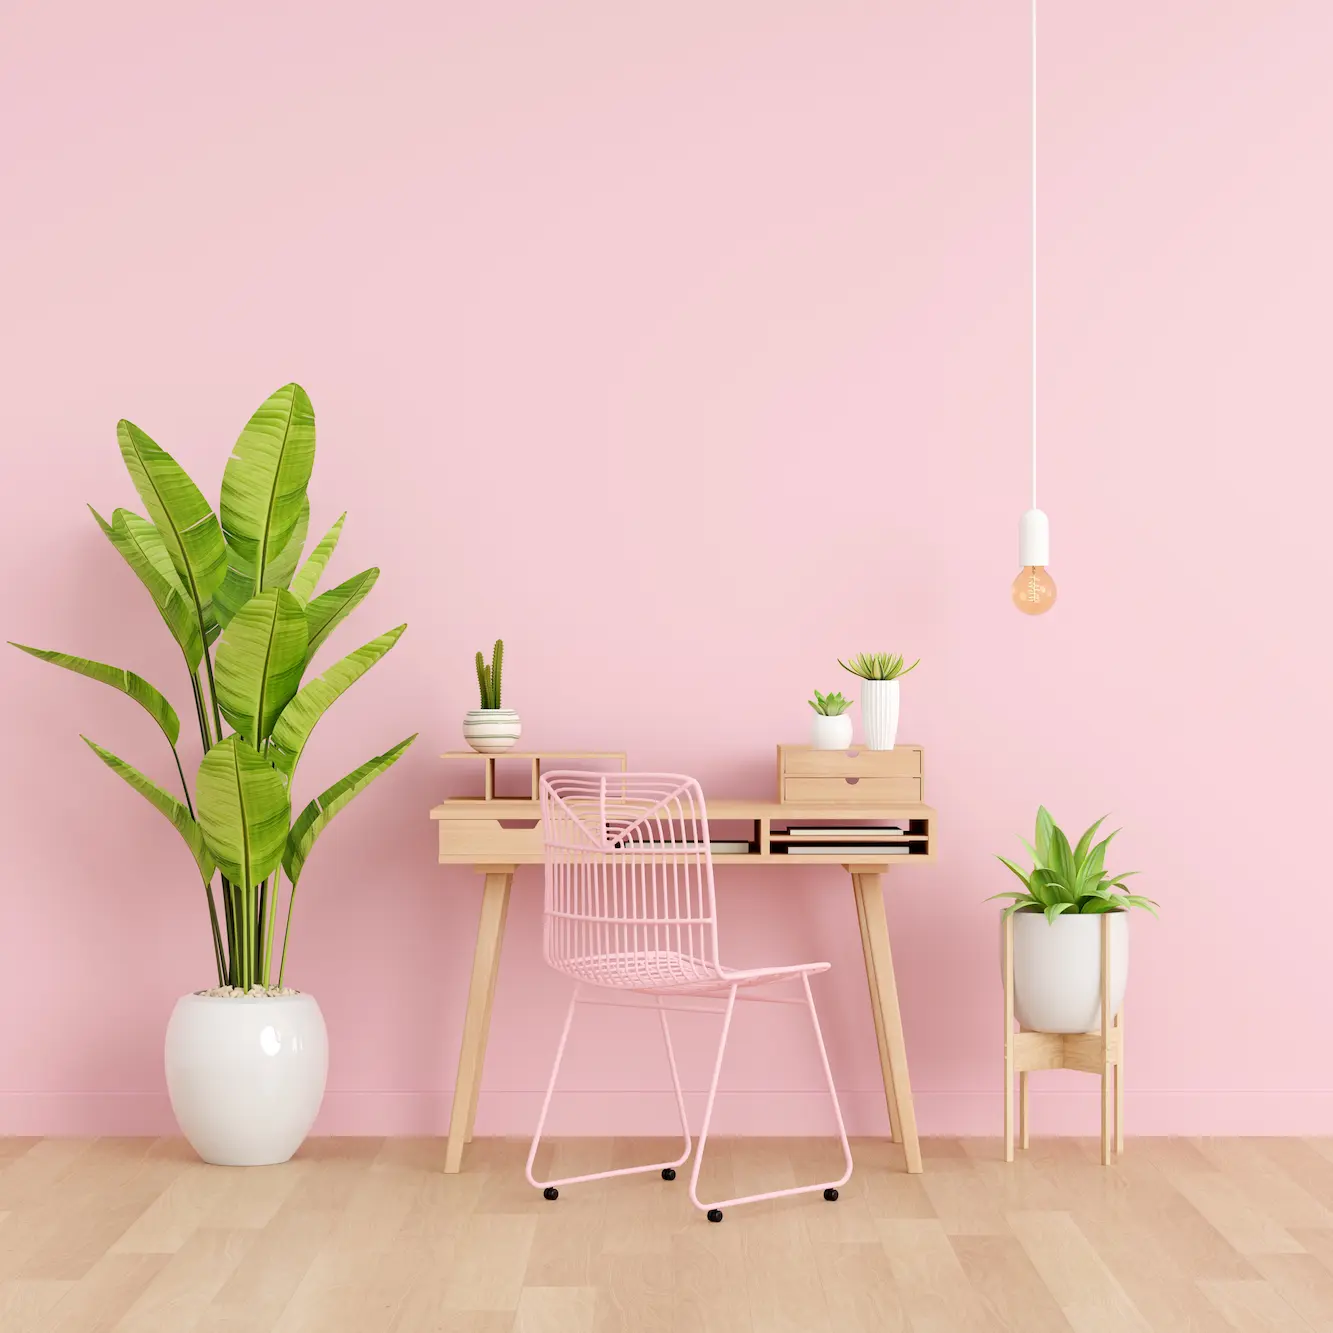 chair-table-pink-living-room-with-copy-space